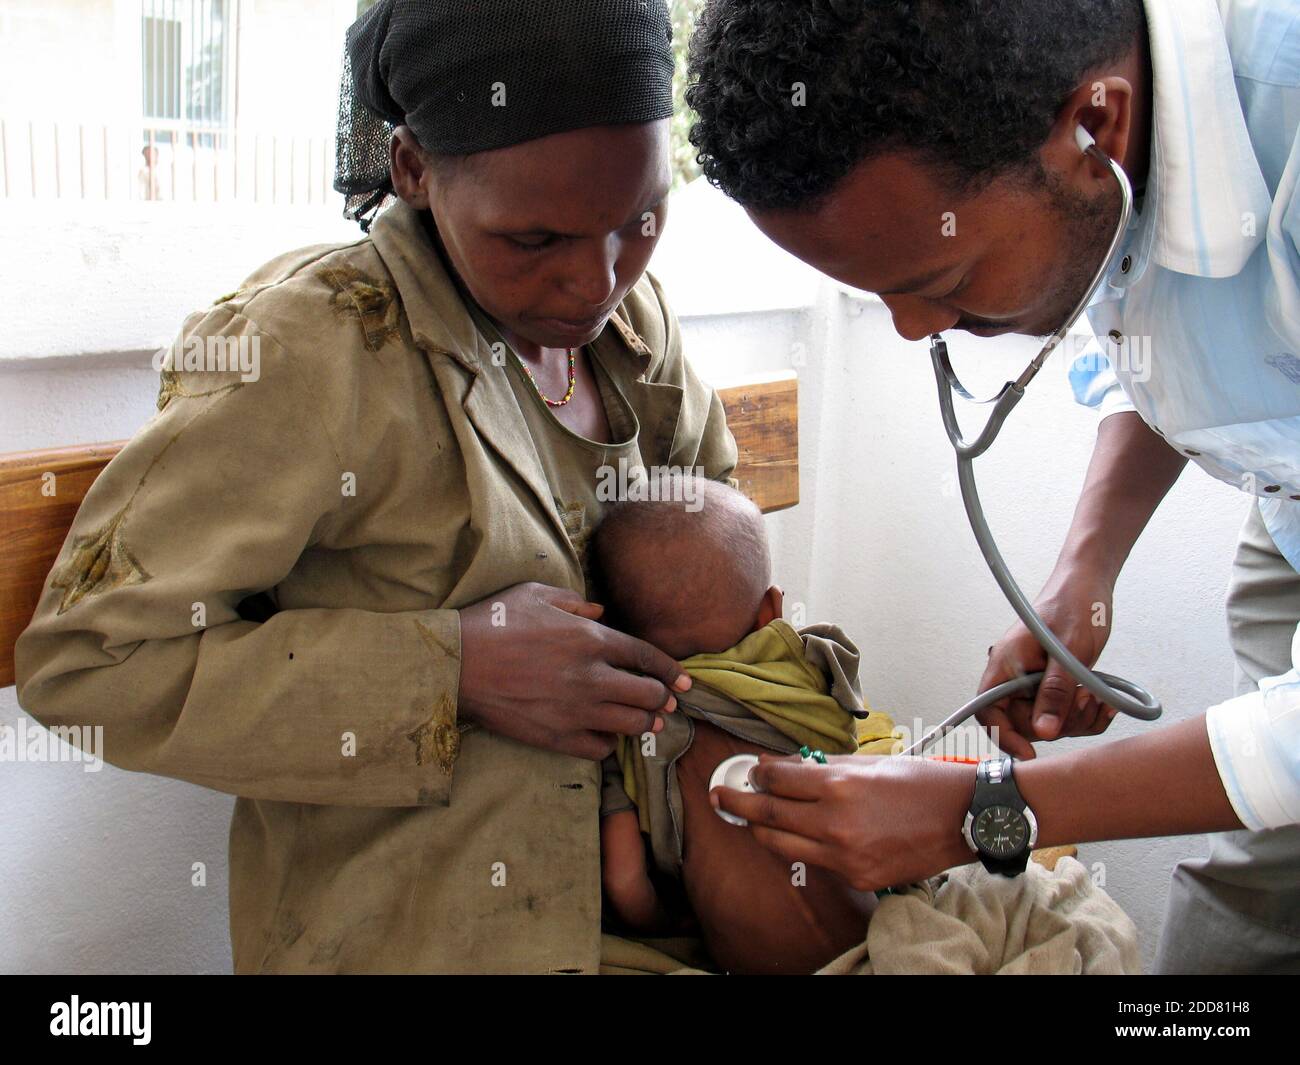 NO FILM, NO VIDEO, NO TV, NO DOCUMENTARY - A doctor checks the heartbeat of a malnourished child at a clinic run by the medical charity Doctors Without Borders in Shashemene, Ethiopia, May 28, 2008. The U.N. Children's Fund has warned that 6 million Ethiopian children under the age of 5 require emergency feeding. Photo by Shashank Bengali/MCT/ABACAPRESS.COM Stock Photo